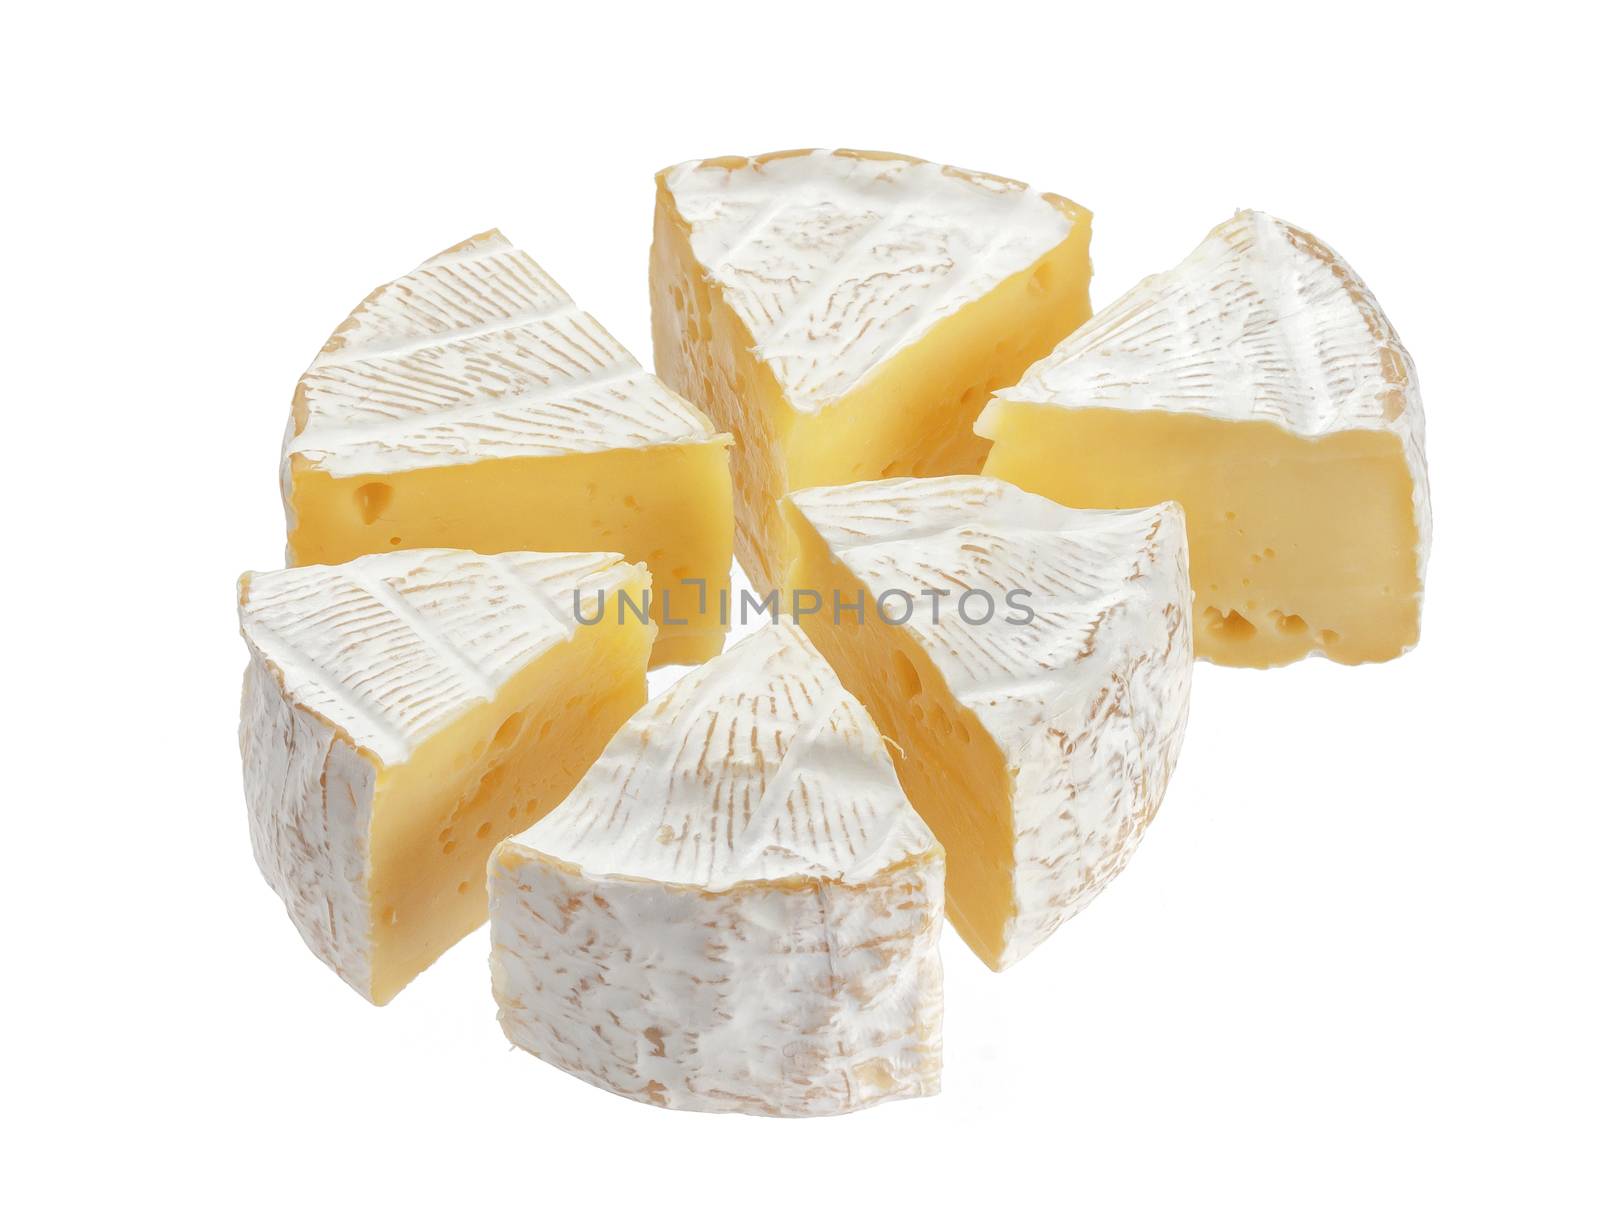 Camembert cheese segments isolated on white background by xamtiw